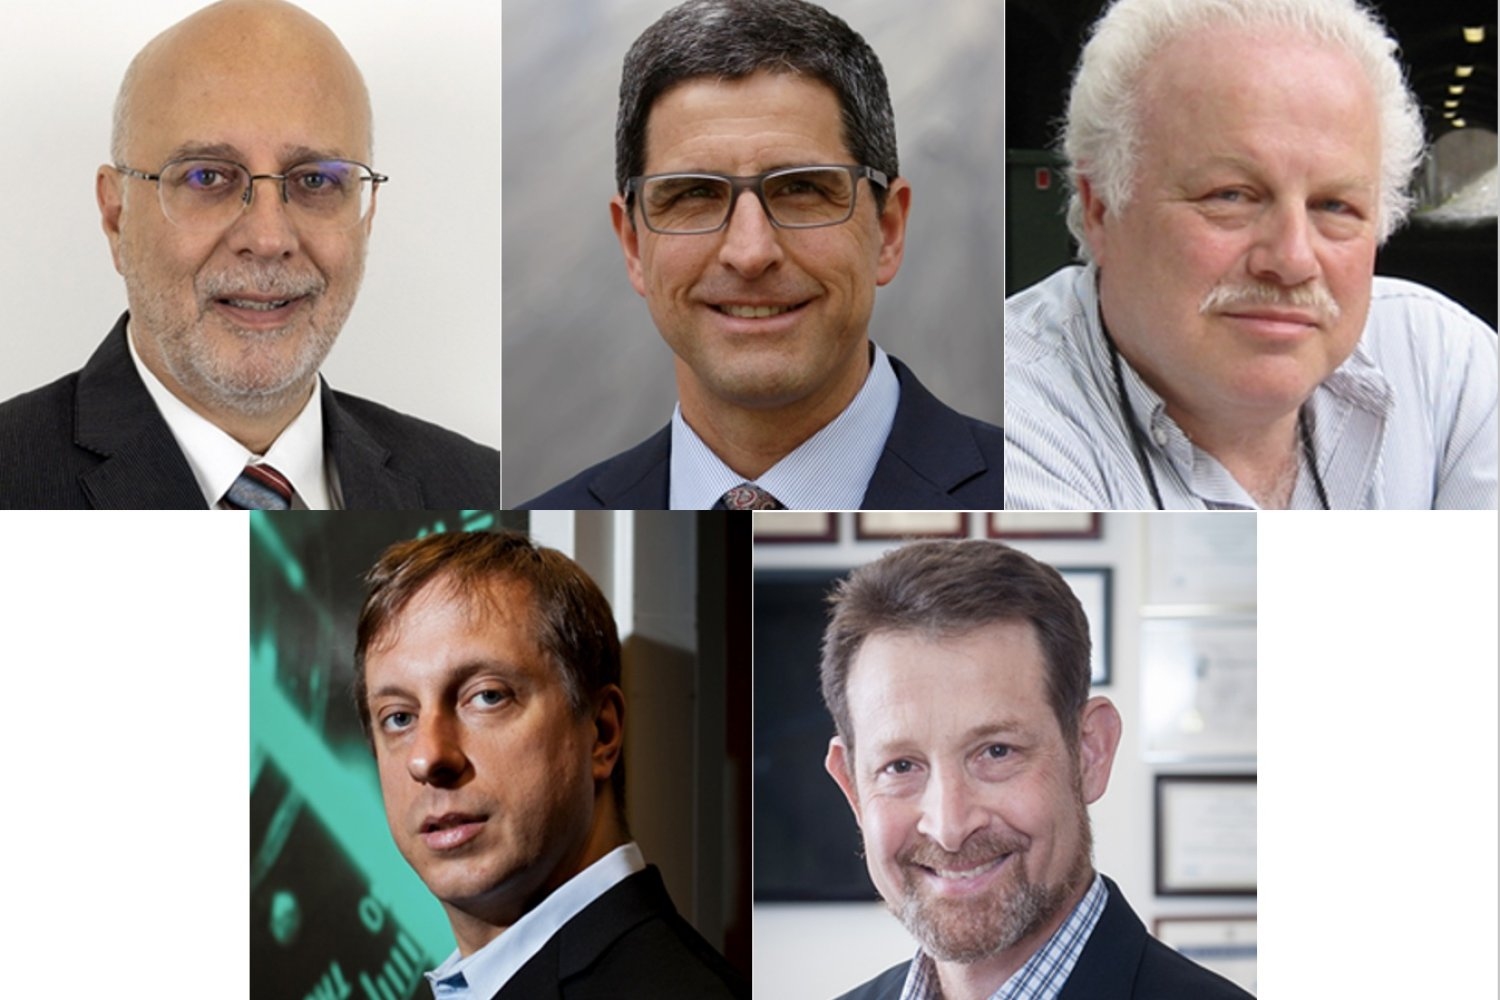 Among 17 recipients of the 2023 Optica awards are: (top row, left to right) Vanderlei Salvador Bagnato PhD '87, Turan Erdogan '87, and Harold Metcalf ’62; and (bottom row, left to right) Professor Marin Soljačić '96 and Andrew Weiner '79, SM '81, ScD '84.